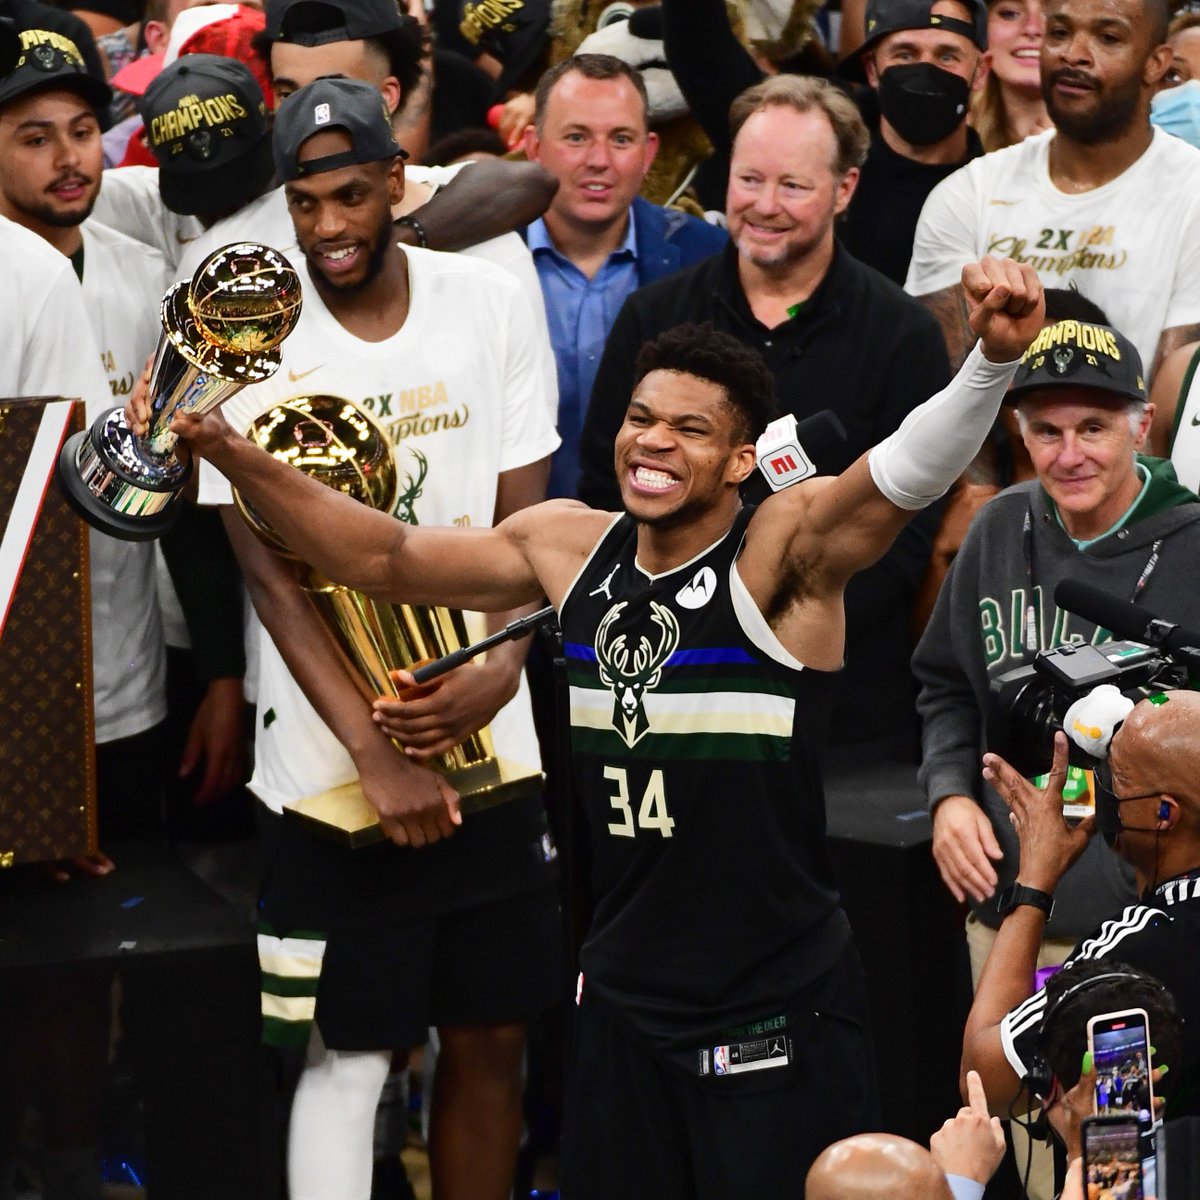 who is favored to win the nba championship